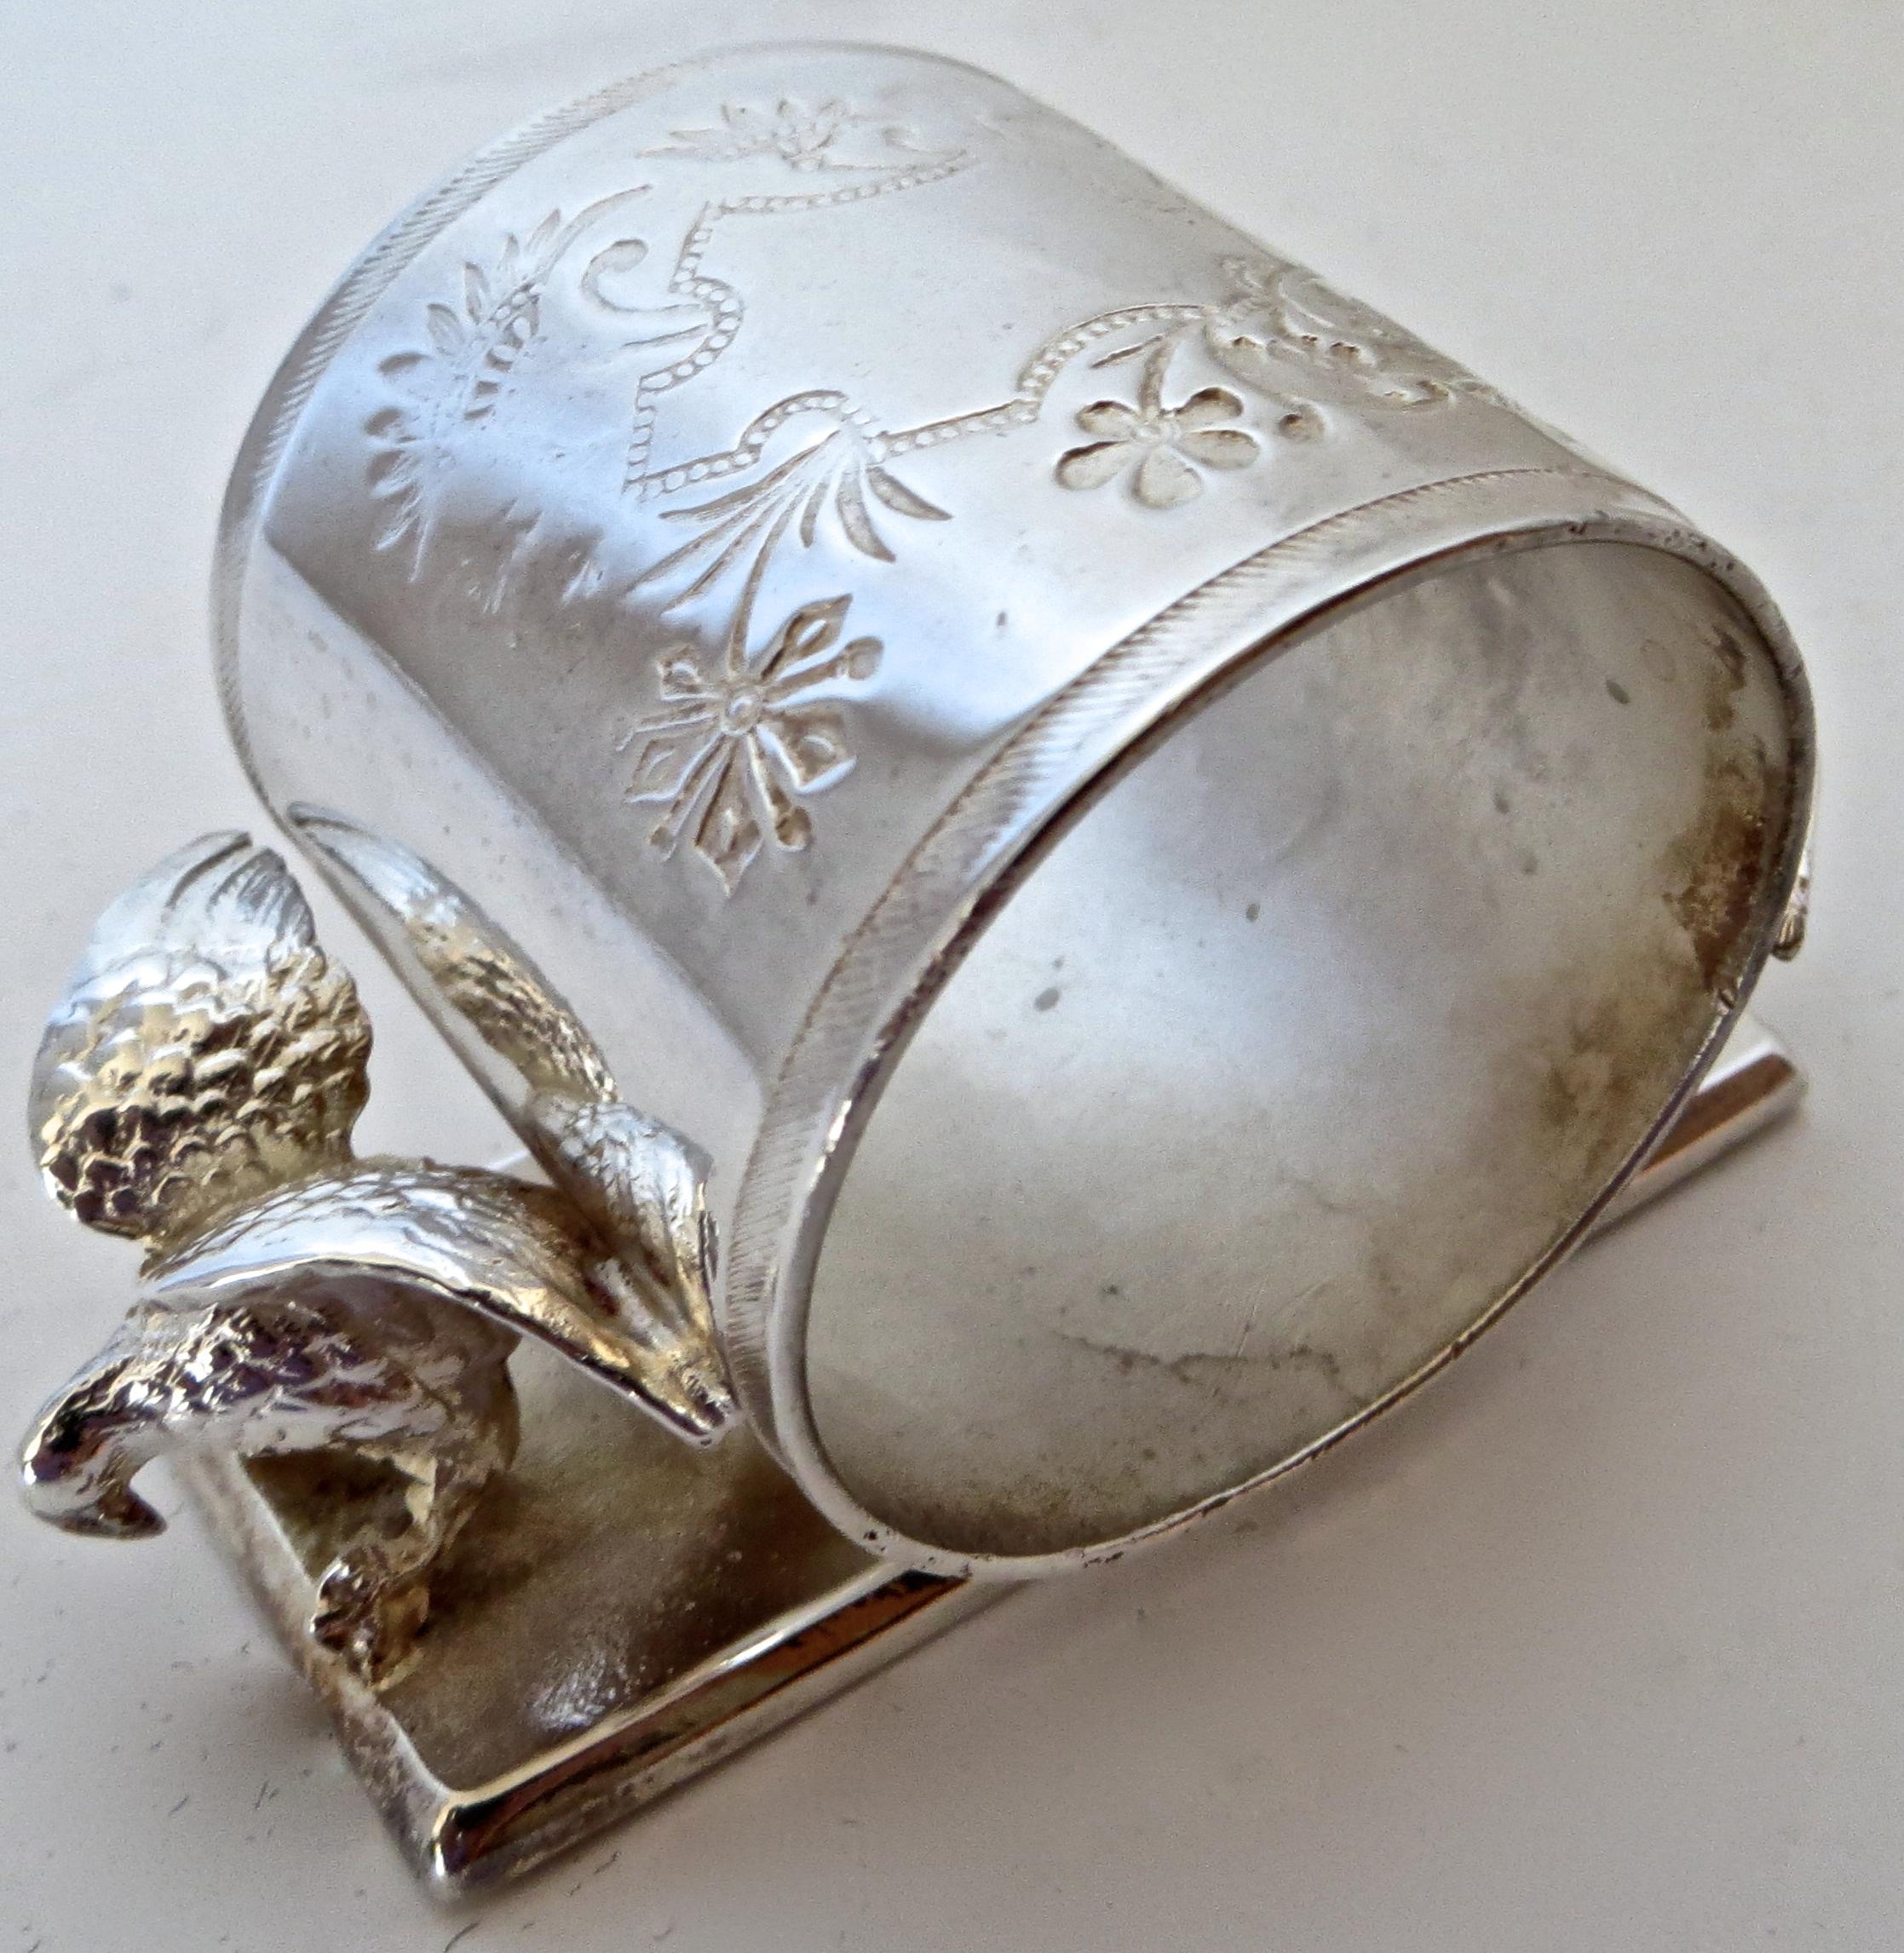 Animal and bird themed napkin rings were quite popular, and used frequently by silver plate manufacturers. They are highly sought after by collectors of Victorian figural napkin rings. Manufactured by the Middleton Plate Company, Middleton